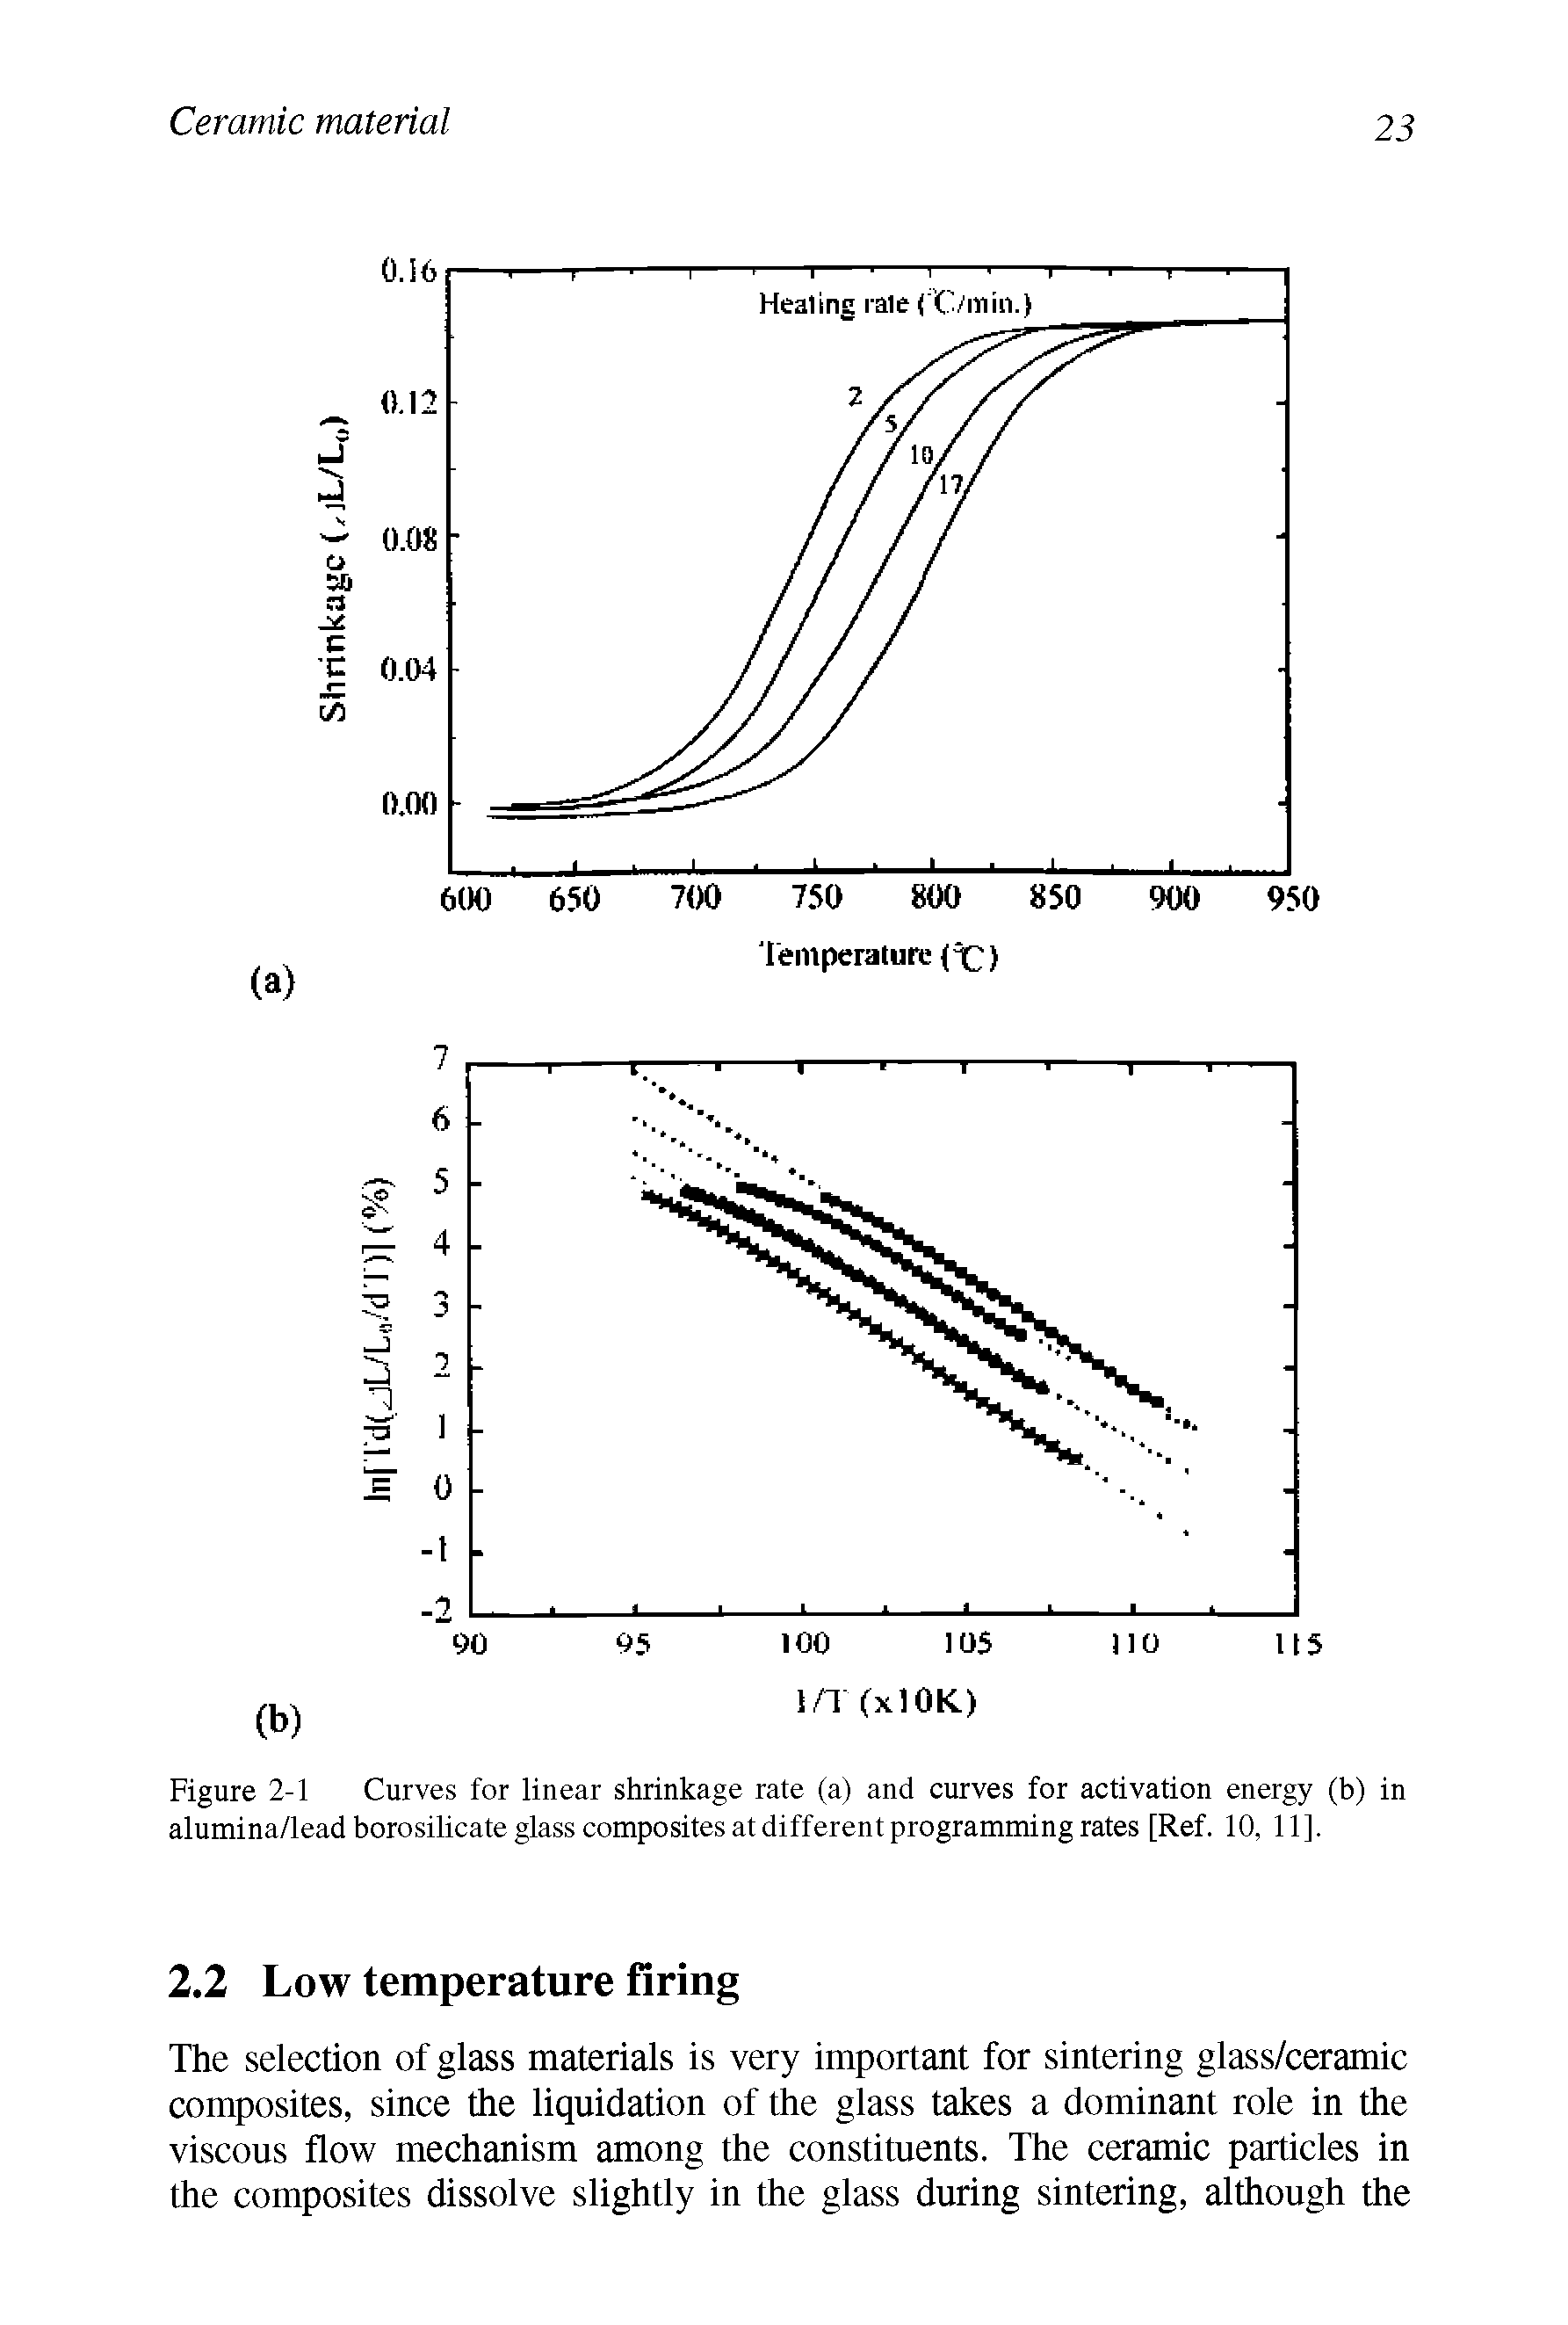 Figure 2-1 Curves for linear shrinkage rate (a) and curves for activation energy (b) in alumina/lead borosilicate glass composites at different programming rates [Ref. 10, 11].